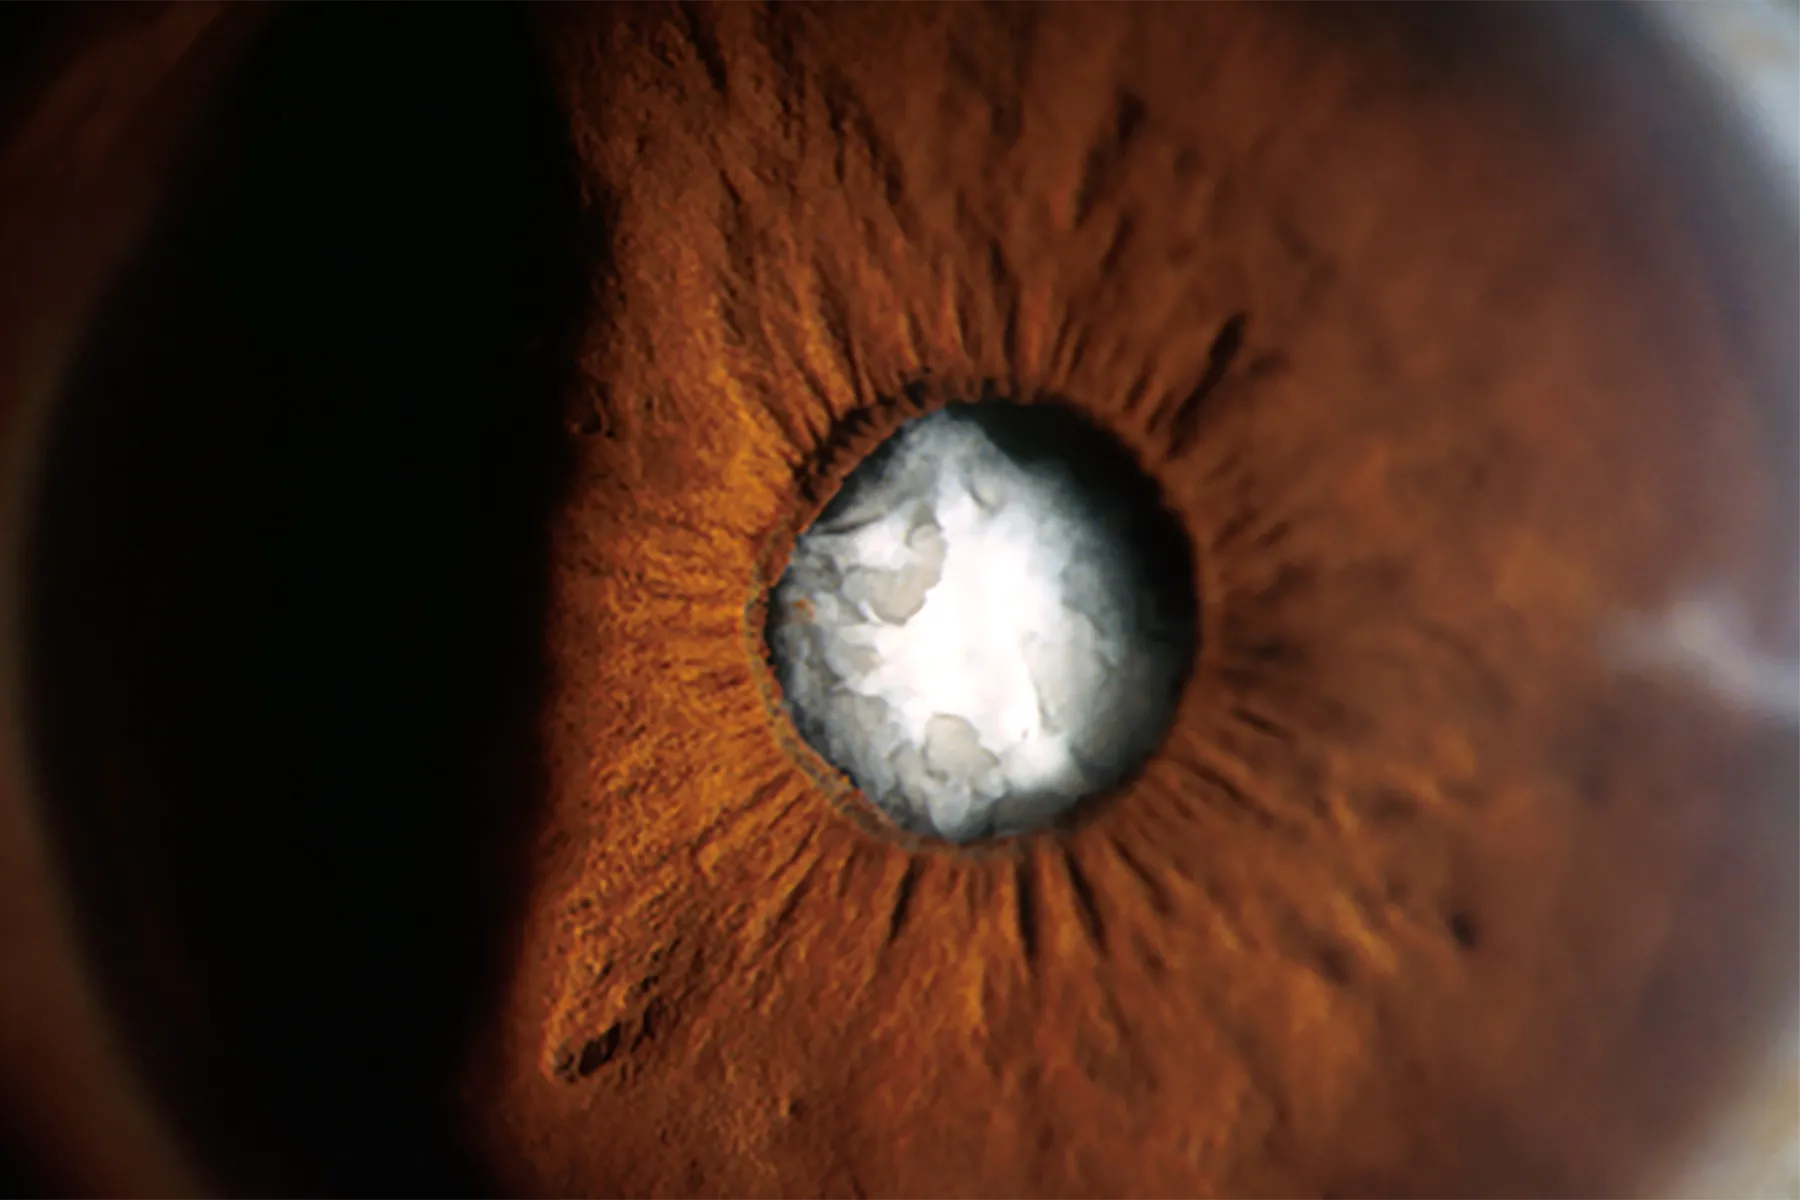 Cataract Surgery Tricky for Those With Past Radial Keratotomy